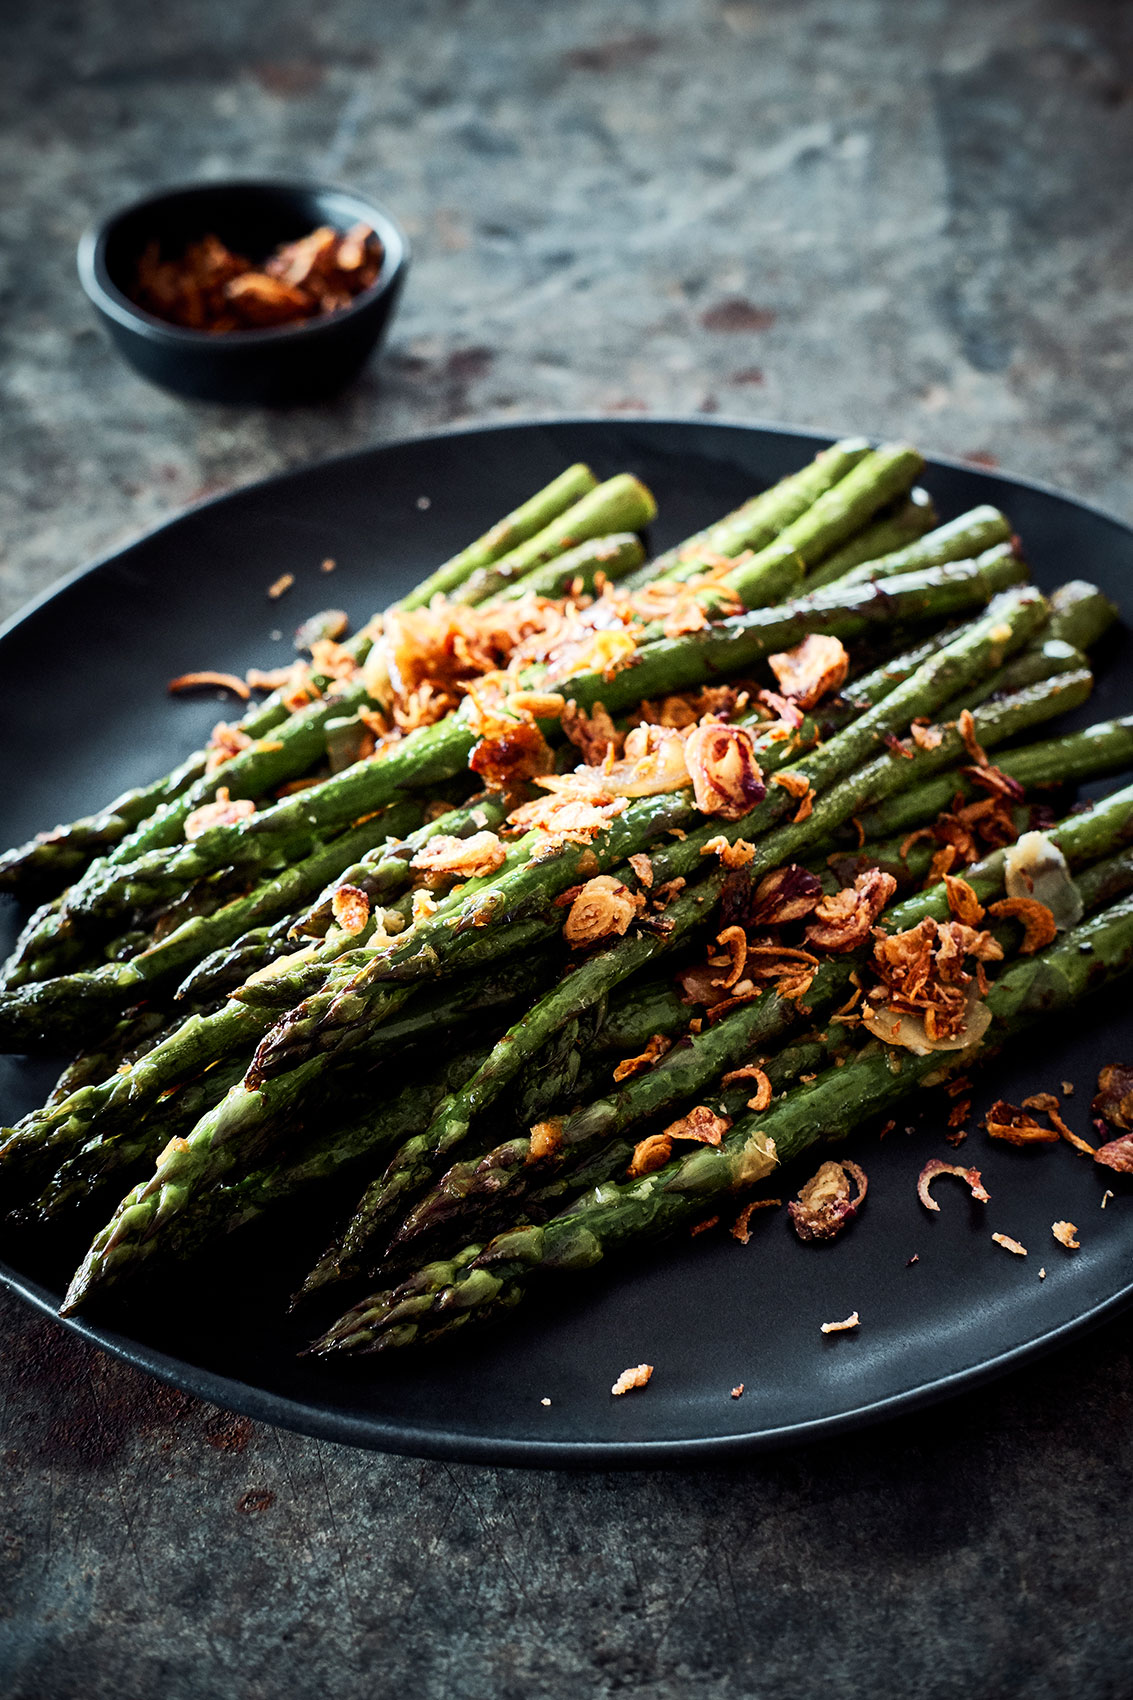 Shared Kitchen • Grilled Asparagus with Crispy Fried Shallots • Lifestyle & Editorial Food Photography